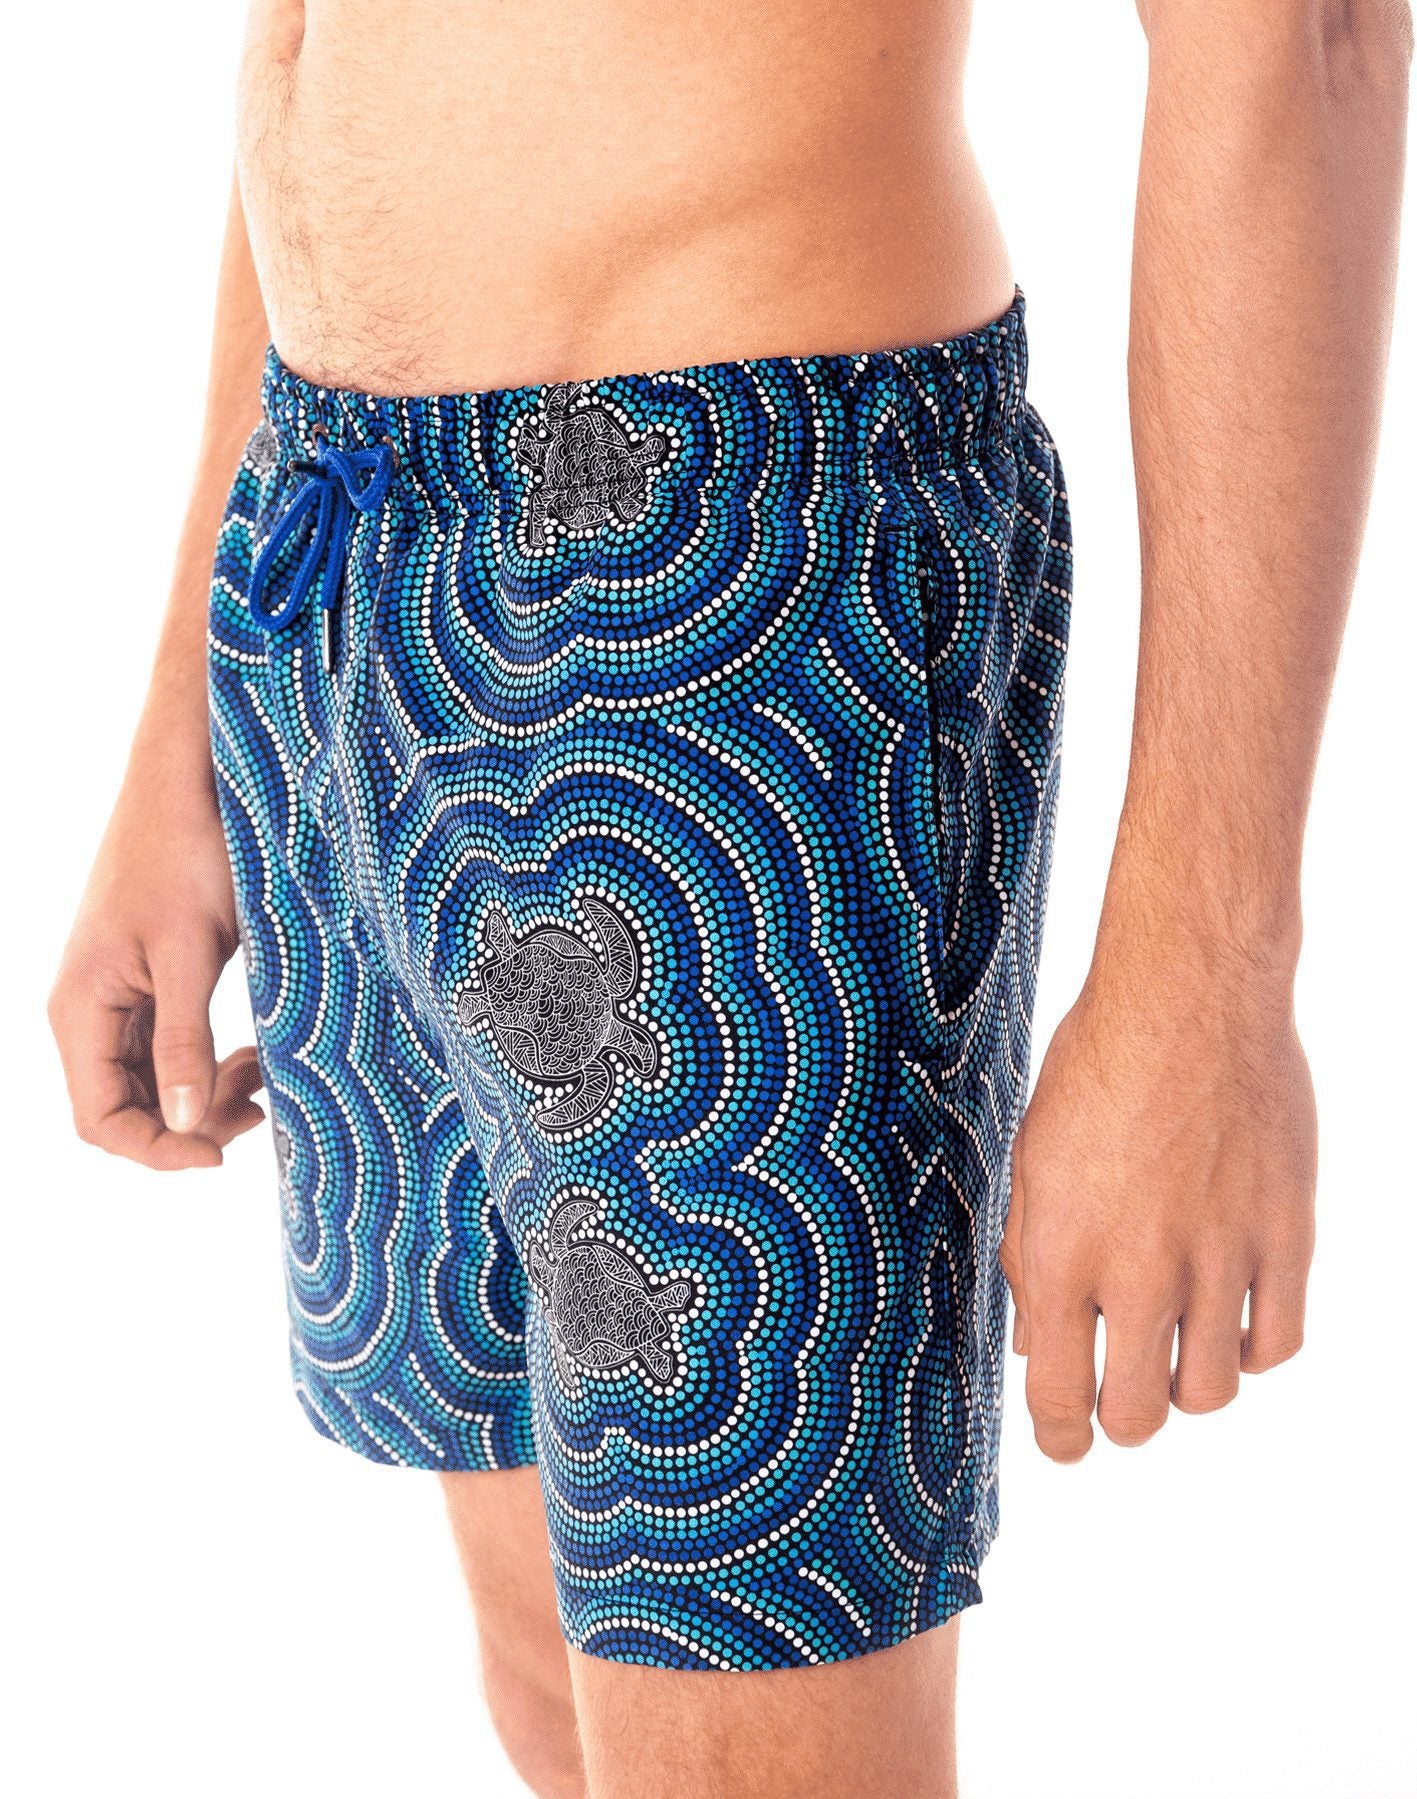 Eco-Friendly Dot art turtle Print Mens' Shorts by SevenC's - Side view on model